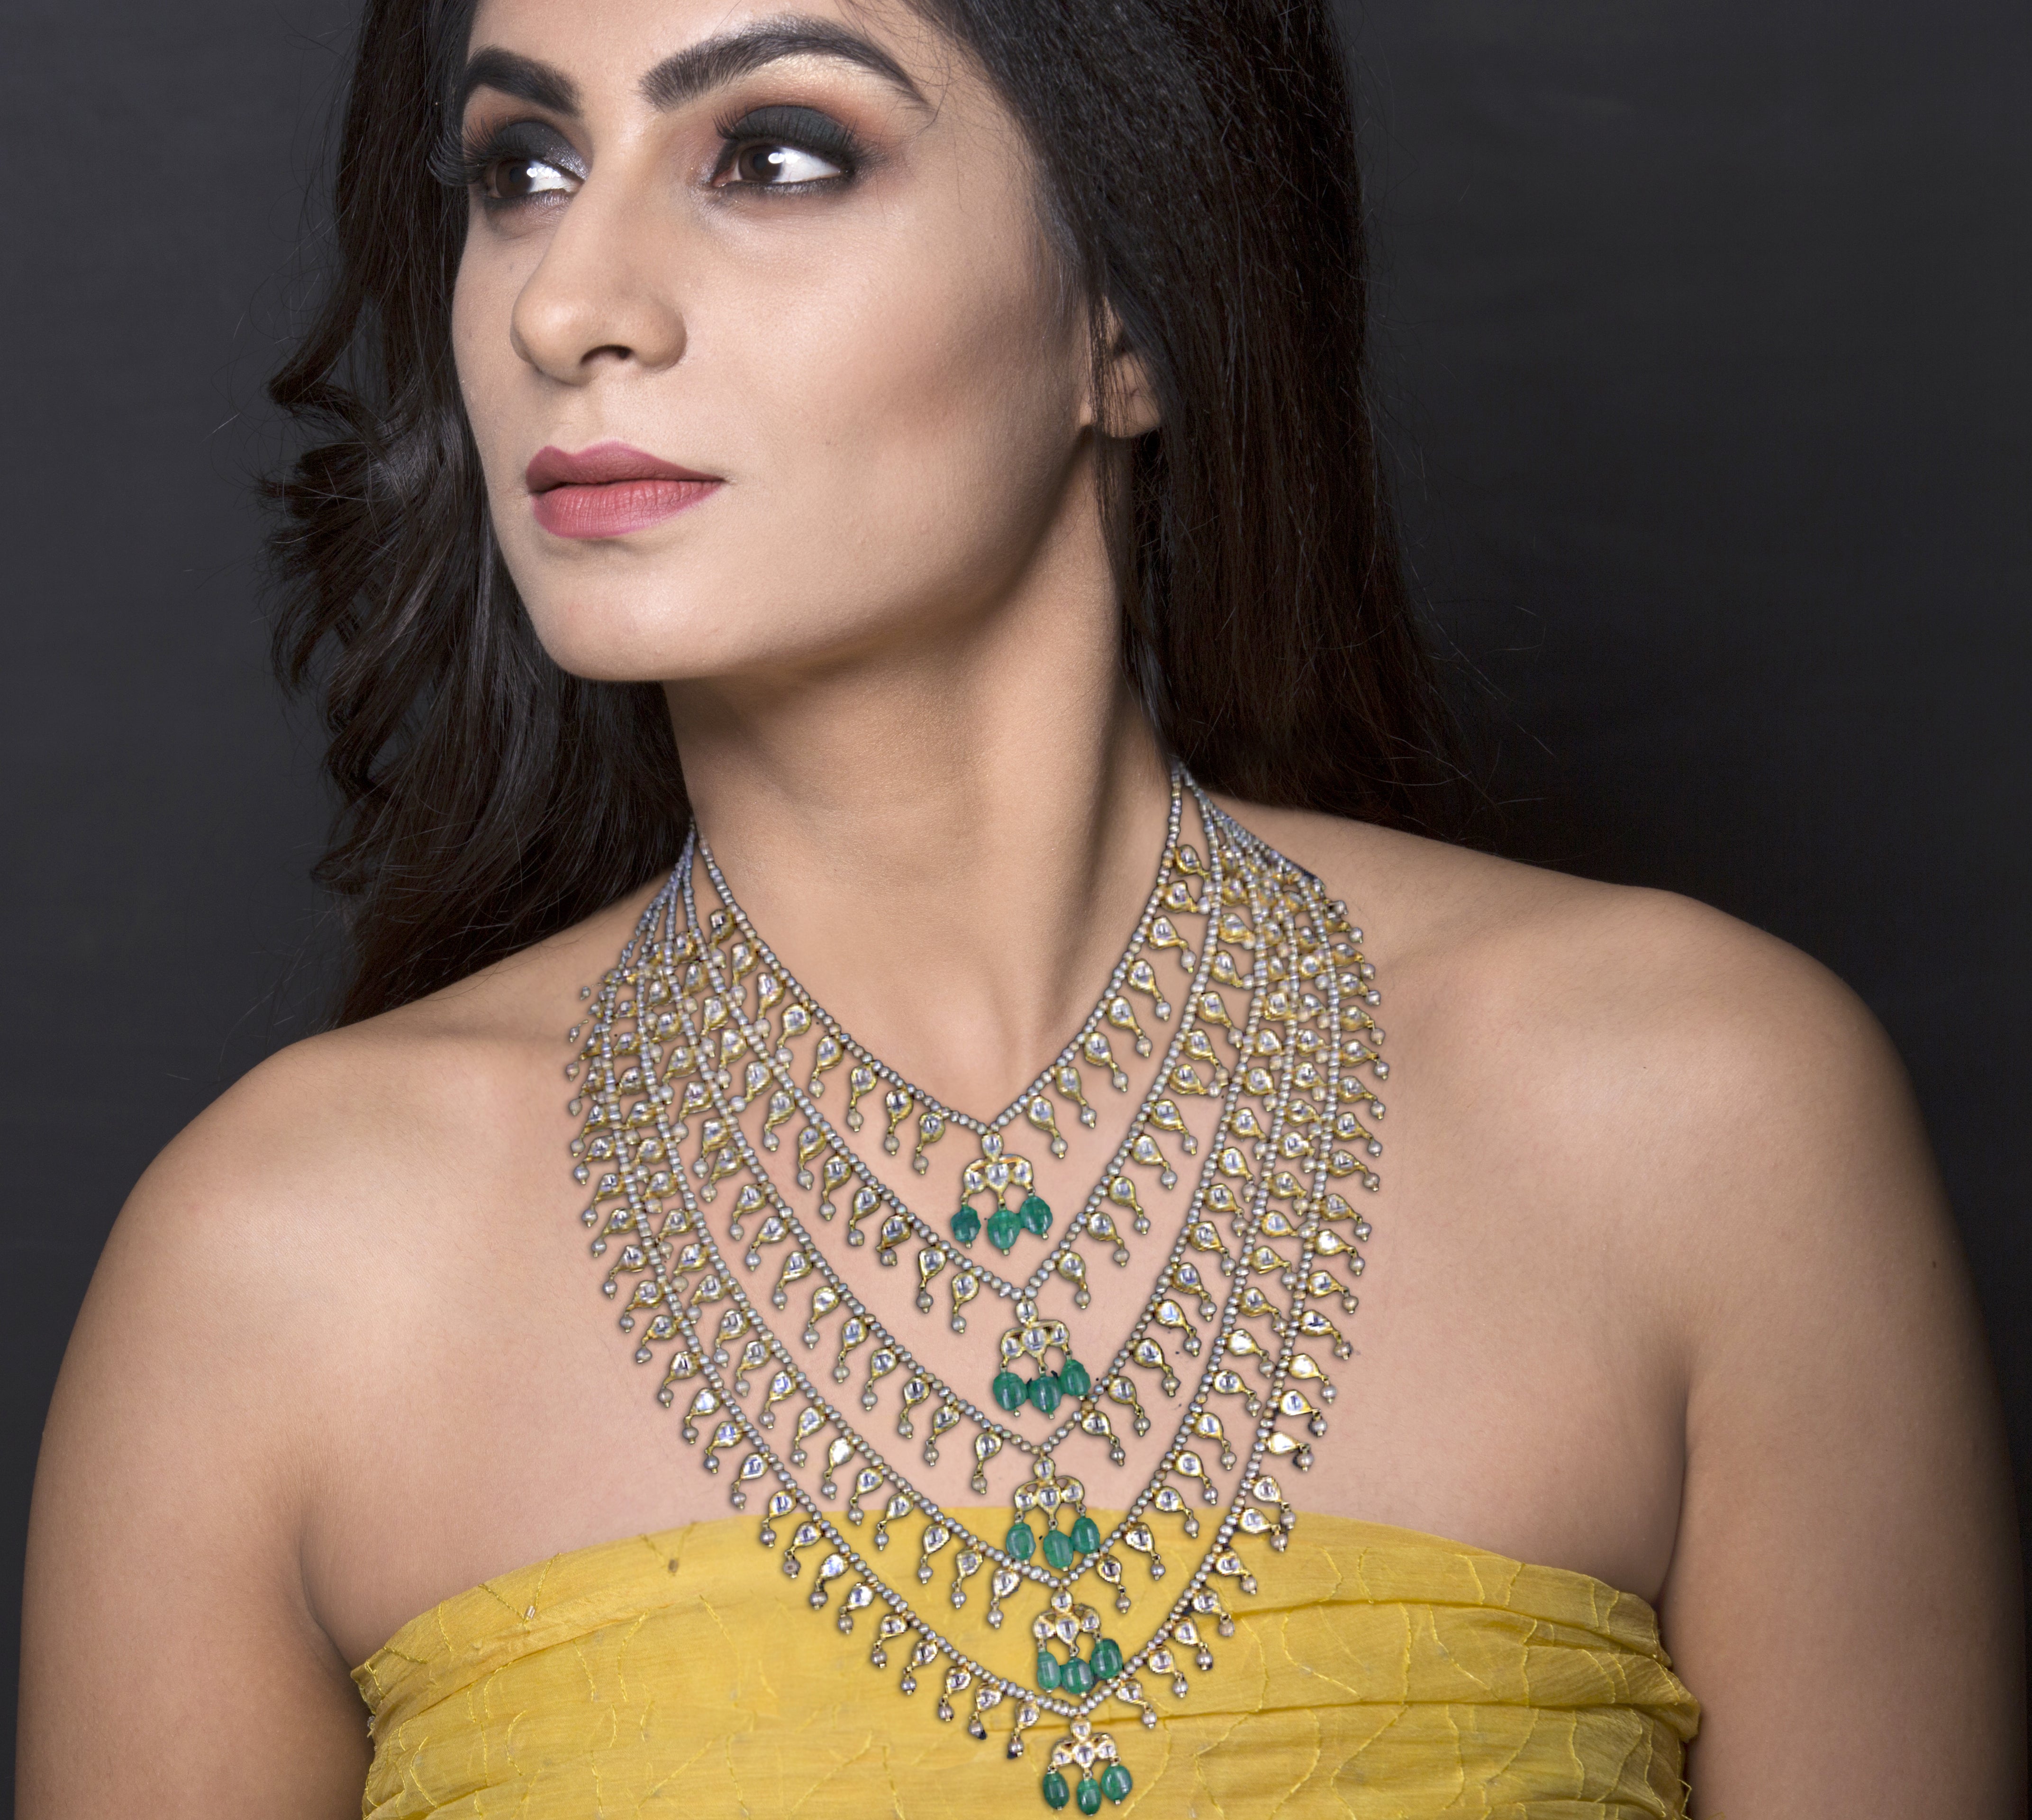 18k Gold and Diamond Polki panch-lad (five-row) Necklace with Antiqued Freshwater Pearls and Green Beryls